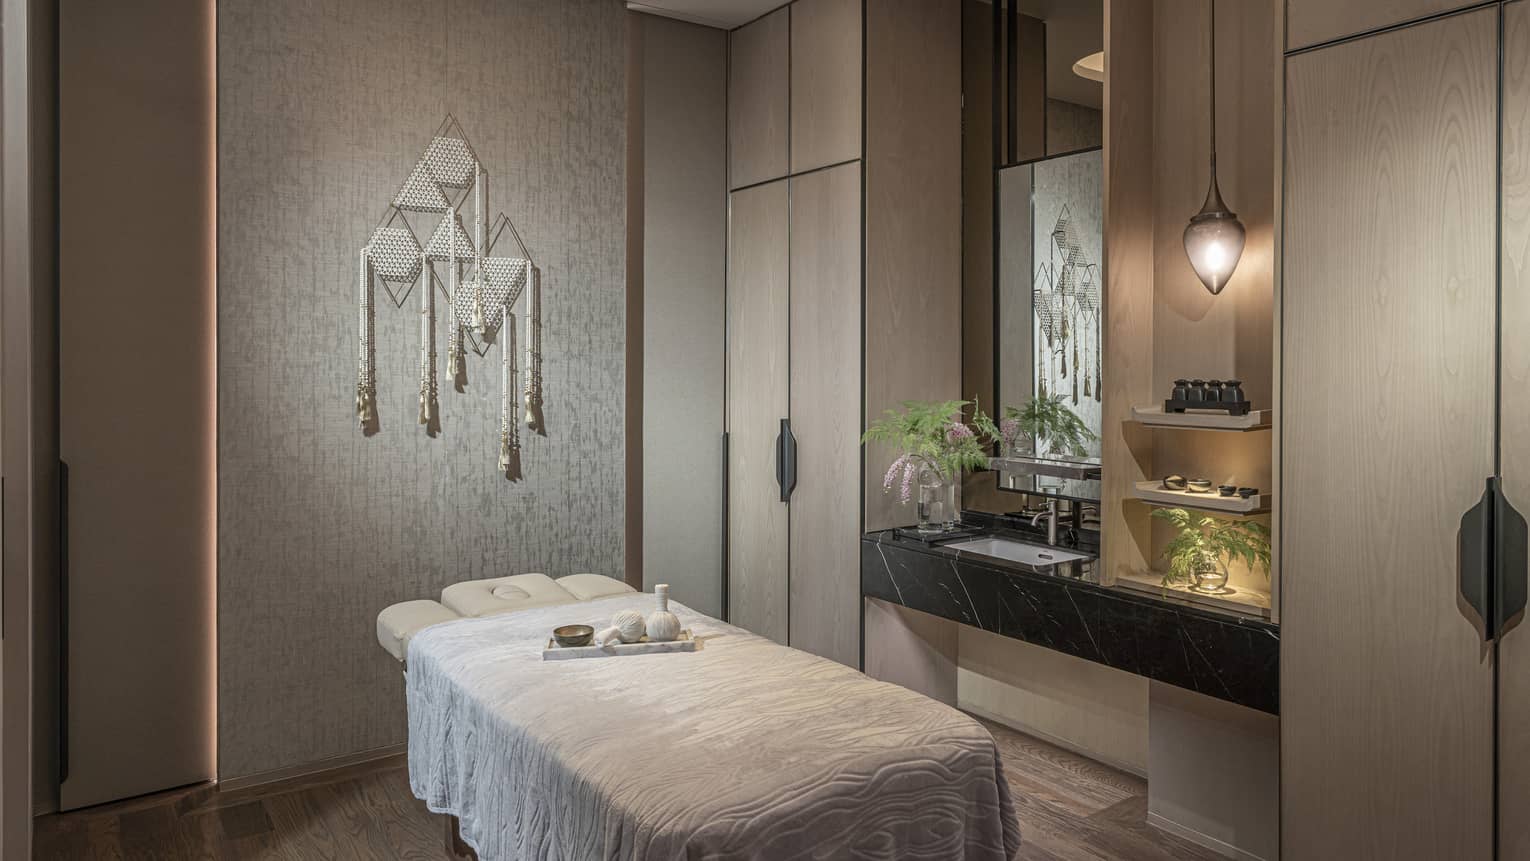 Private treatment room with single massage table